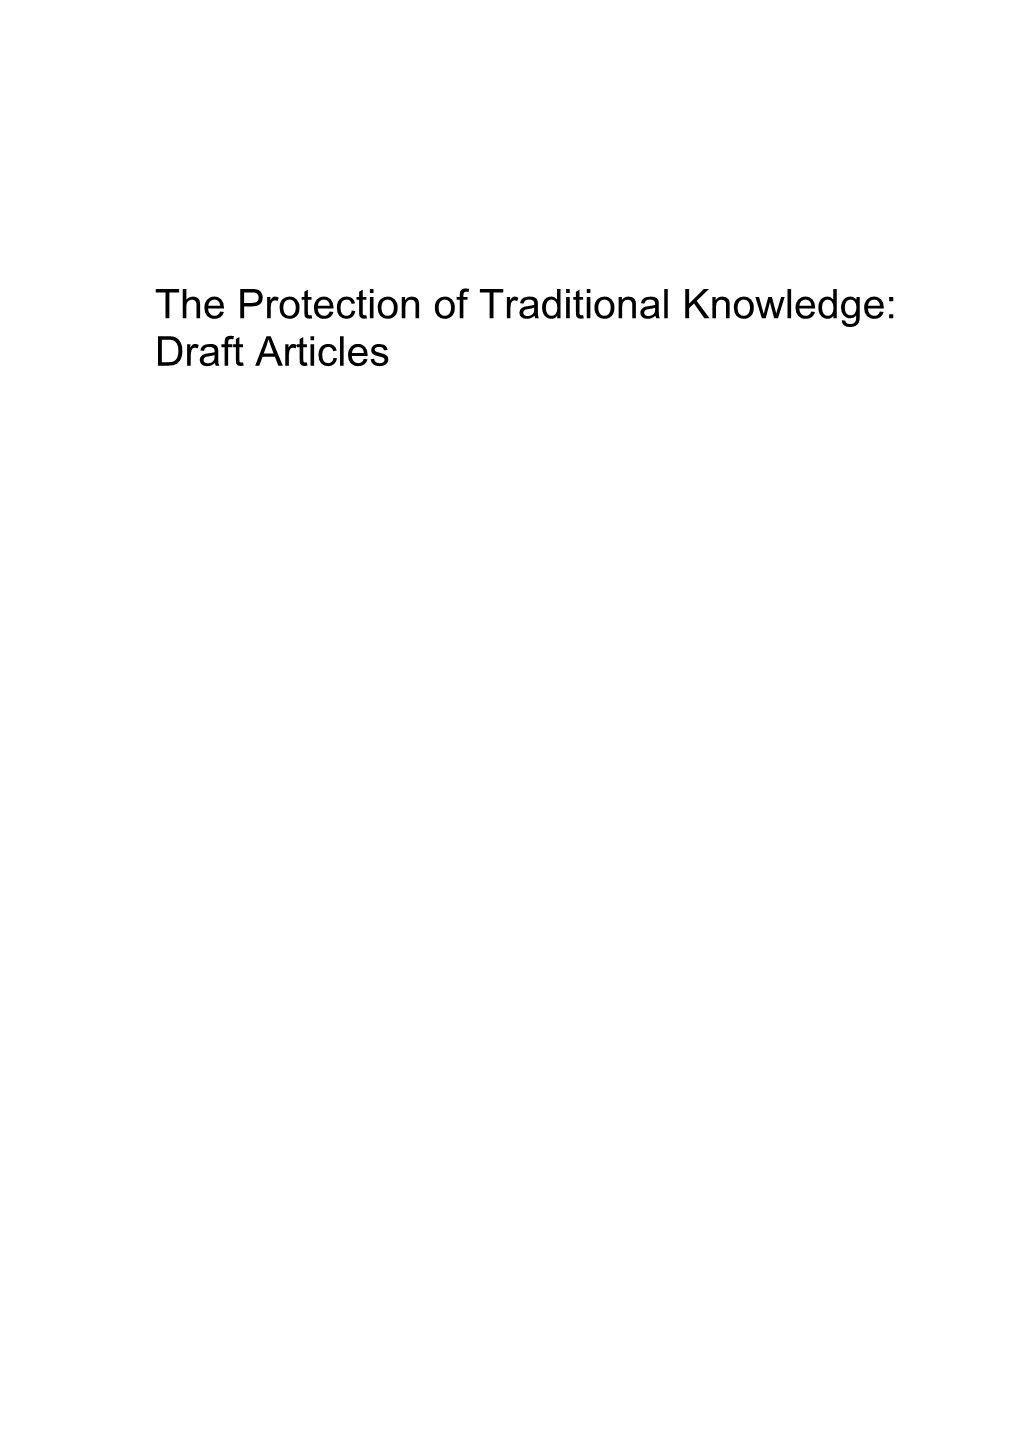 The Protection of Traditional Knowledge: Draft Articles